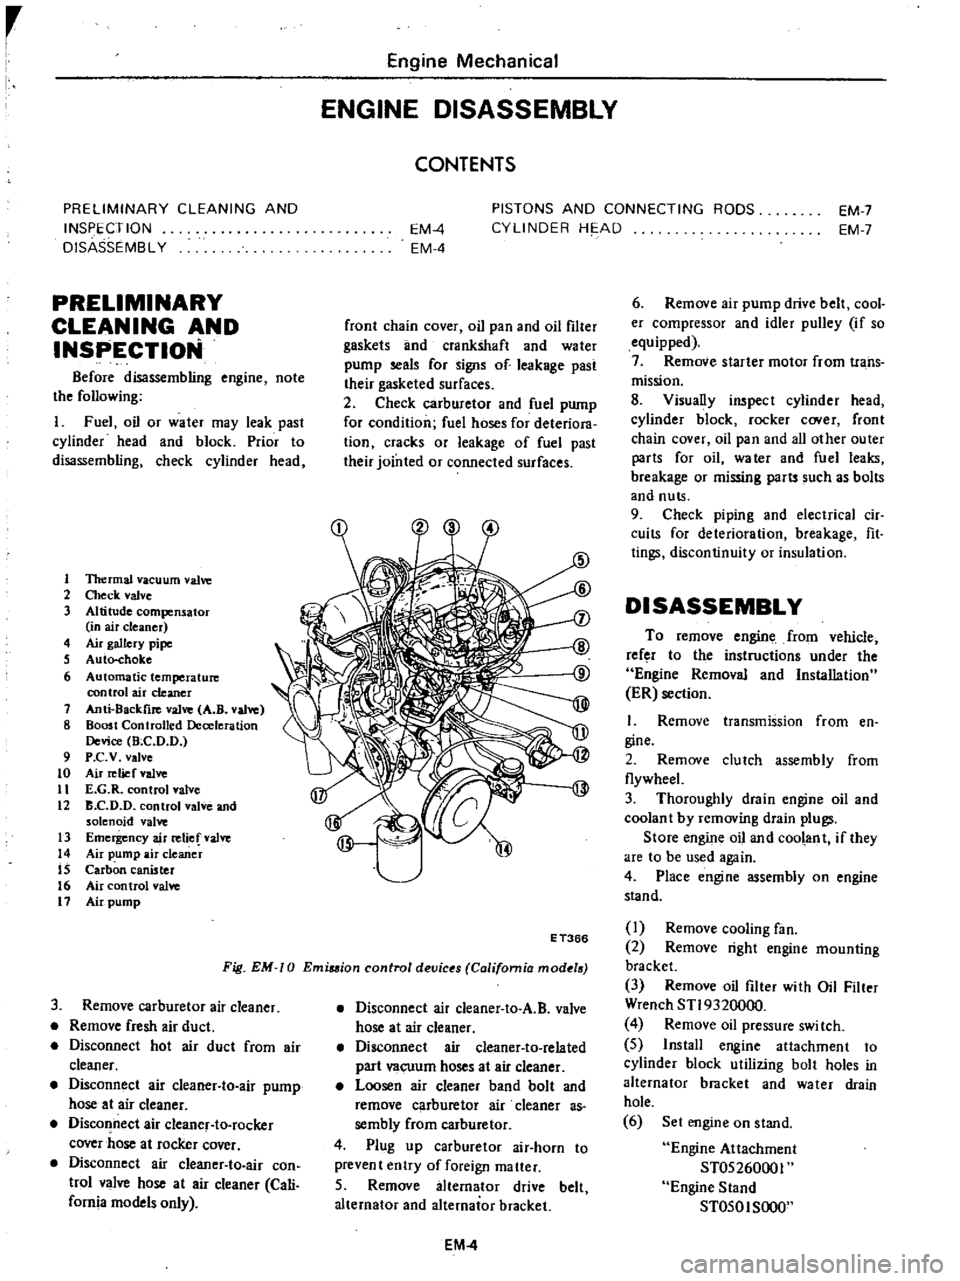 DATSUN PICK-UP 1977  Service Manual 
r

I

I

PRELIMINARY 
CLEANING 
AND

INSPECTION

DISASSEMBL 
Y

PRELIMINARY

CLEANING 
AND

INSt

ECTION

Before

disassembling

engine 
note

the

following

I 
Fuel

oil 
or 
water

may 
leak

past